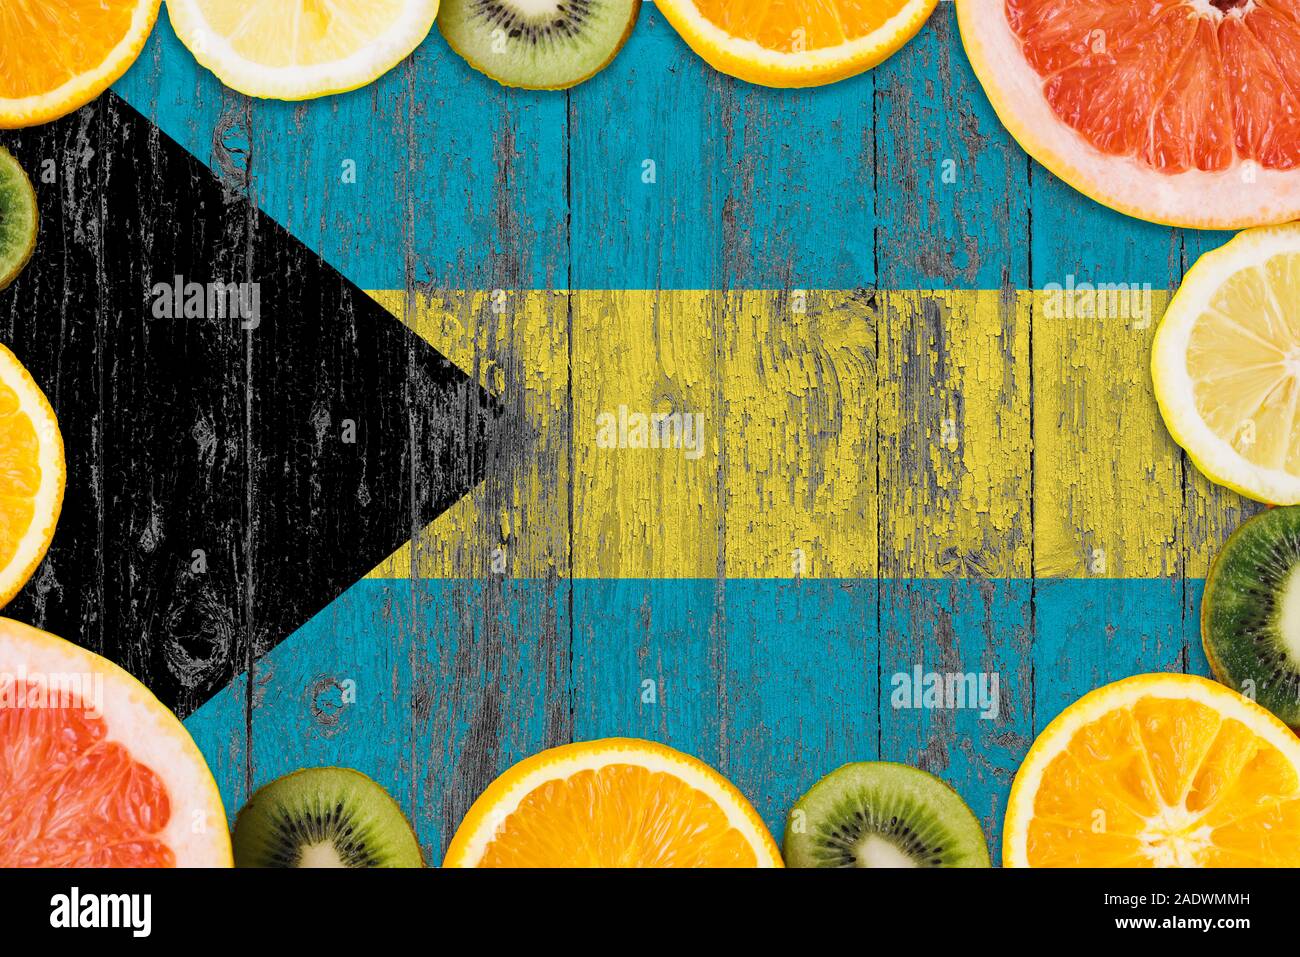 Bahamas food concept. Fresh fruits from traditional gardens. Cooking concept on wooden flag background. Stock Photo